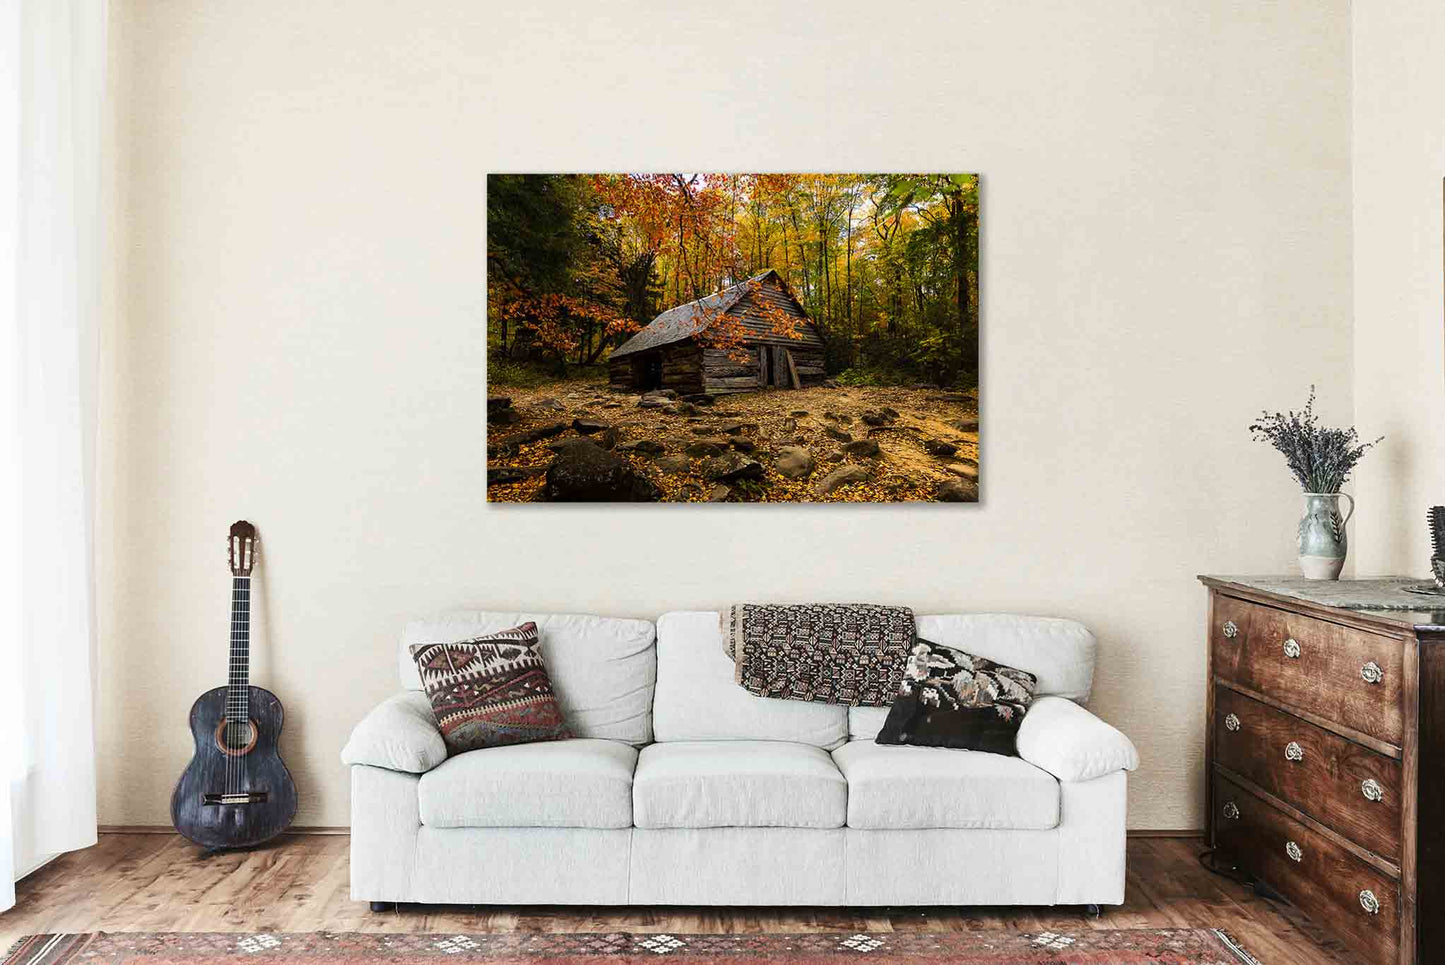 Country Metal Print (Ready to Hang) Photo on Aluminum of Old Barn Surrounded by Fall Foliage on Autumn Day in Tennessee Great Smoky Mountains Wall Art Rustic Decor